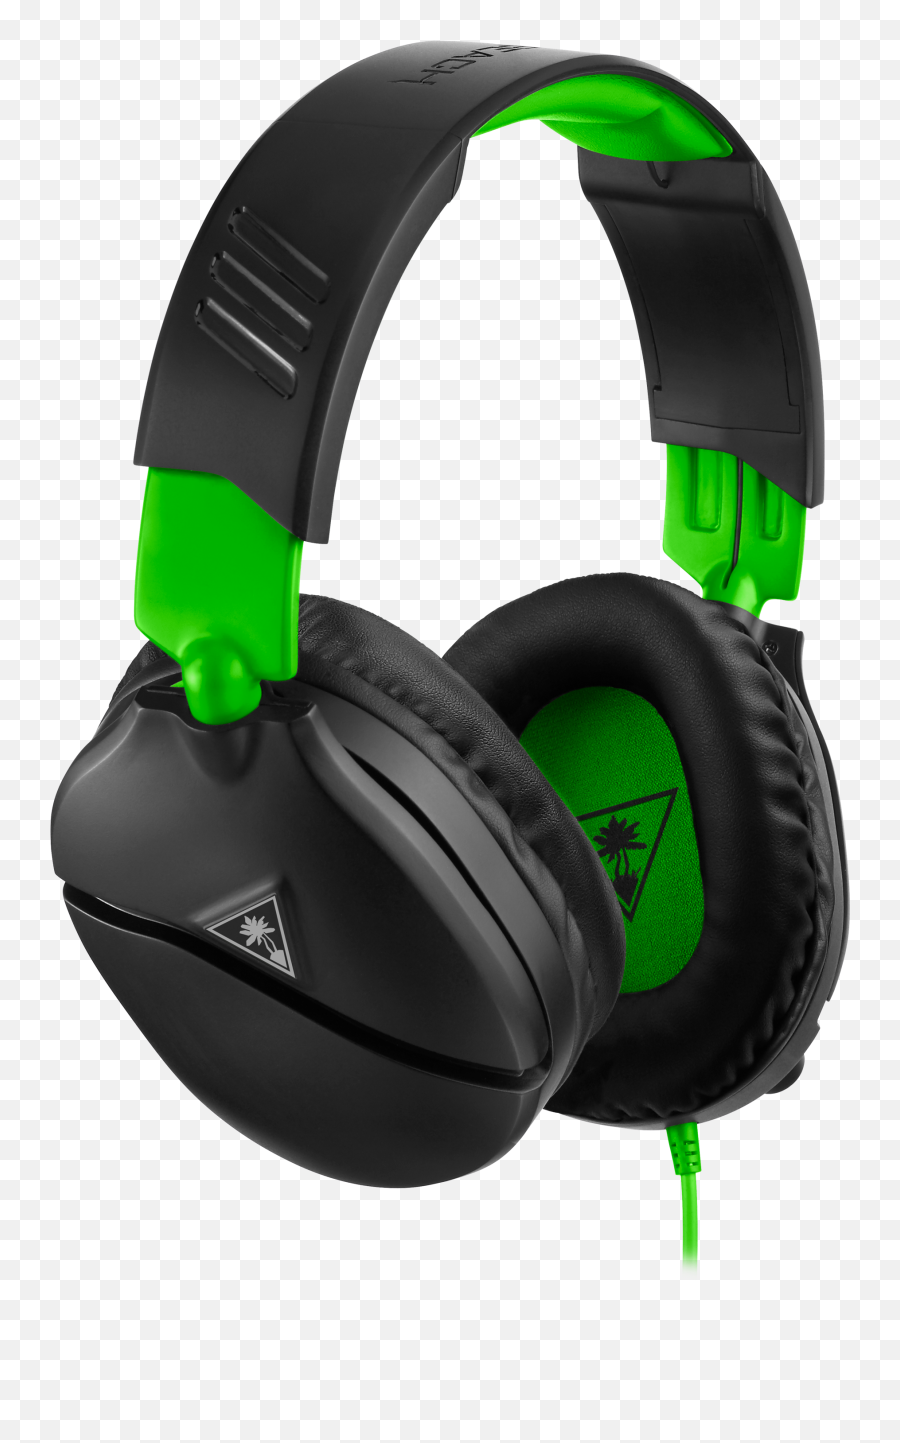 Recon 70 Gaming Headset For Xbox One - Turtle Beach Recon 70 Xbox One Emoji,How To Put Emojis On Xbox One Profile